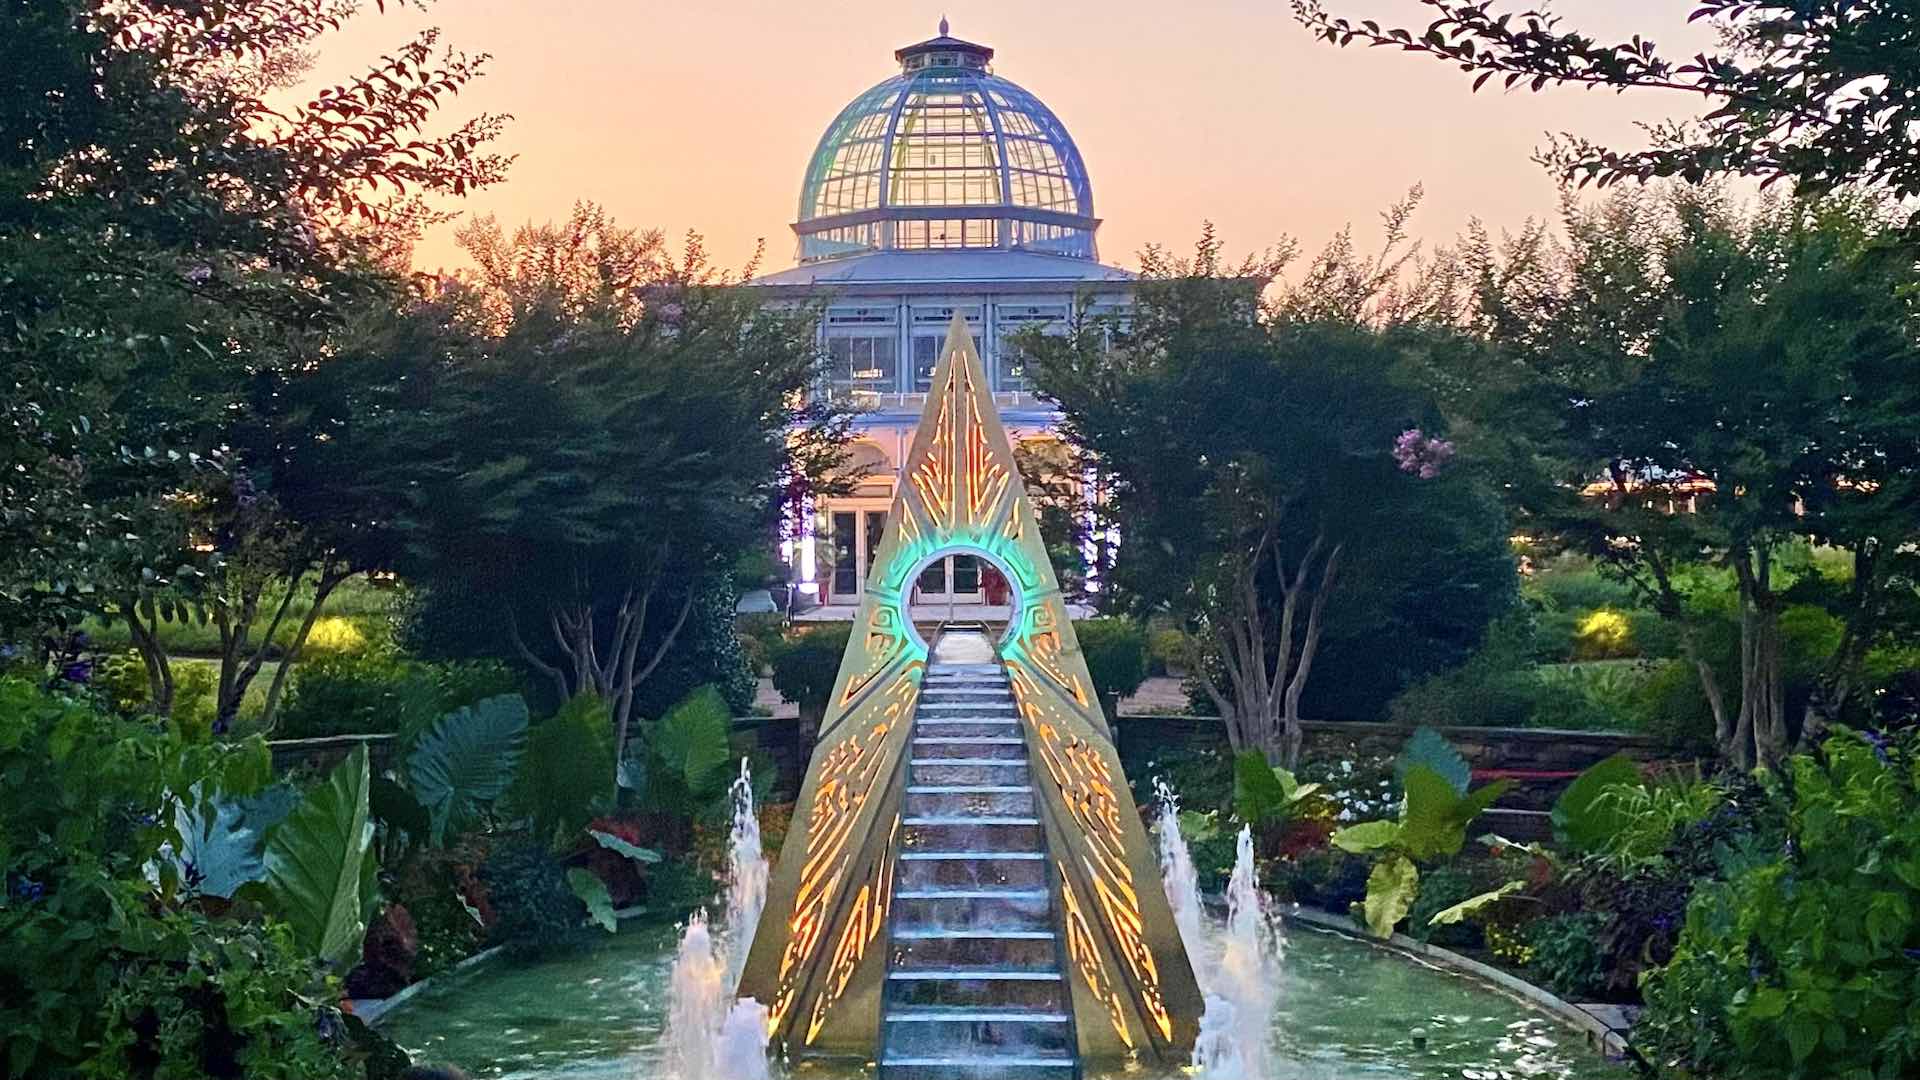 Sunset, magical sculptures, and the beauty of a botanical garden really set the mood for a lovely date night!